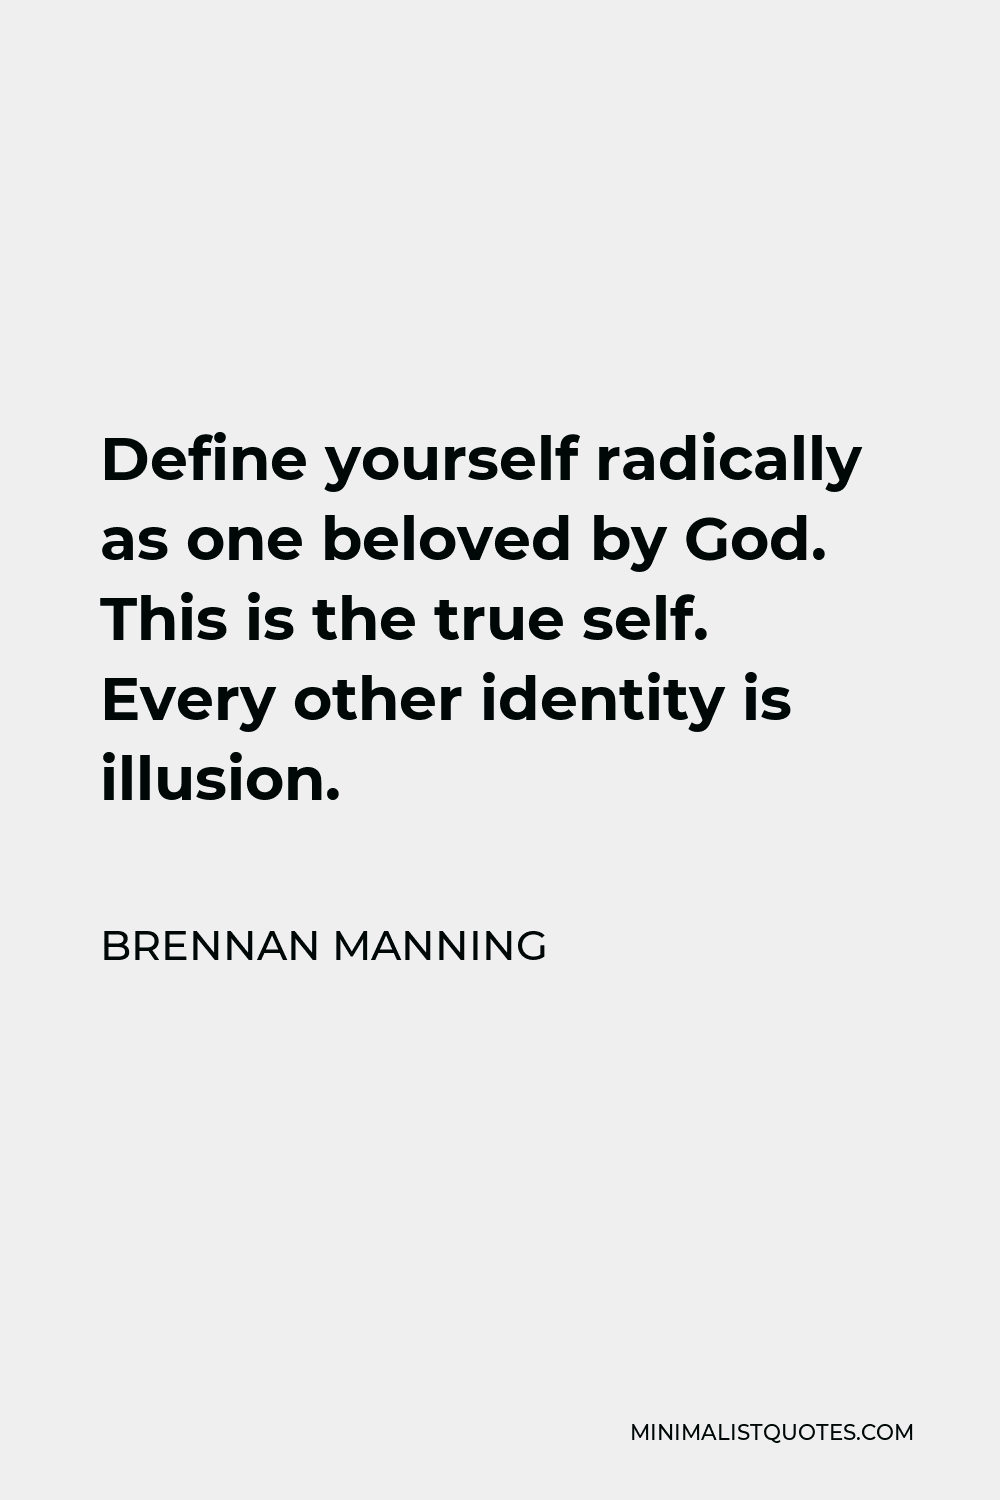 Brennan Manning Quote - Define yourself radically as one beloved by God. This is the true self. Every other identity is illusion.